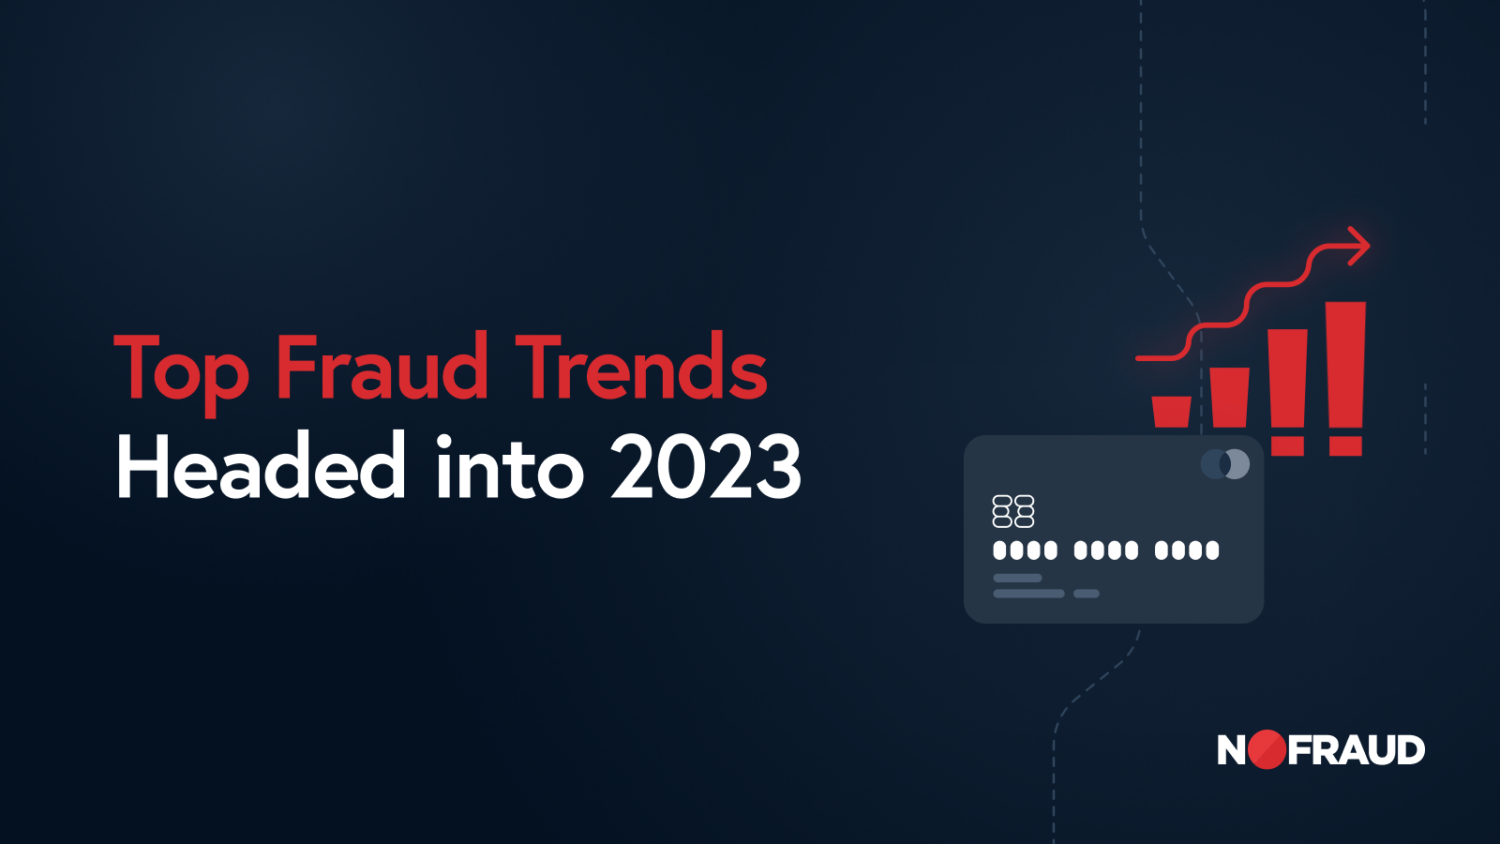 Top Fraud Trends Headed into 2023